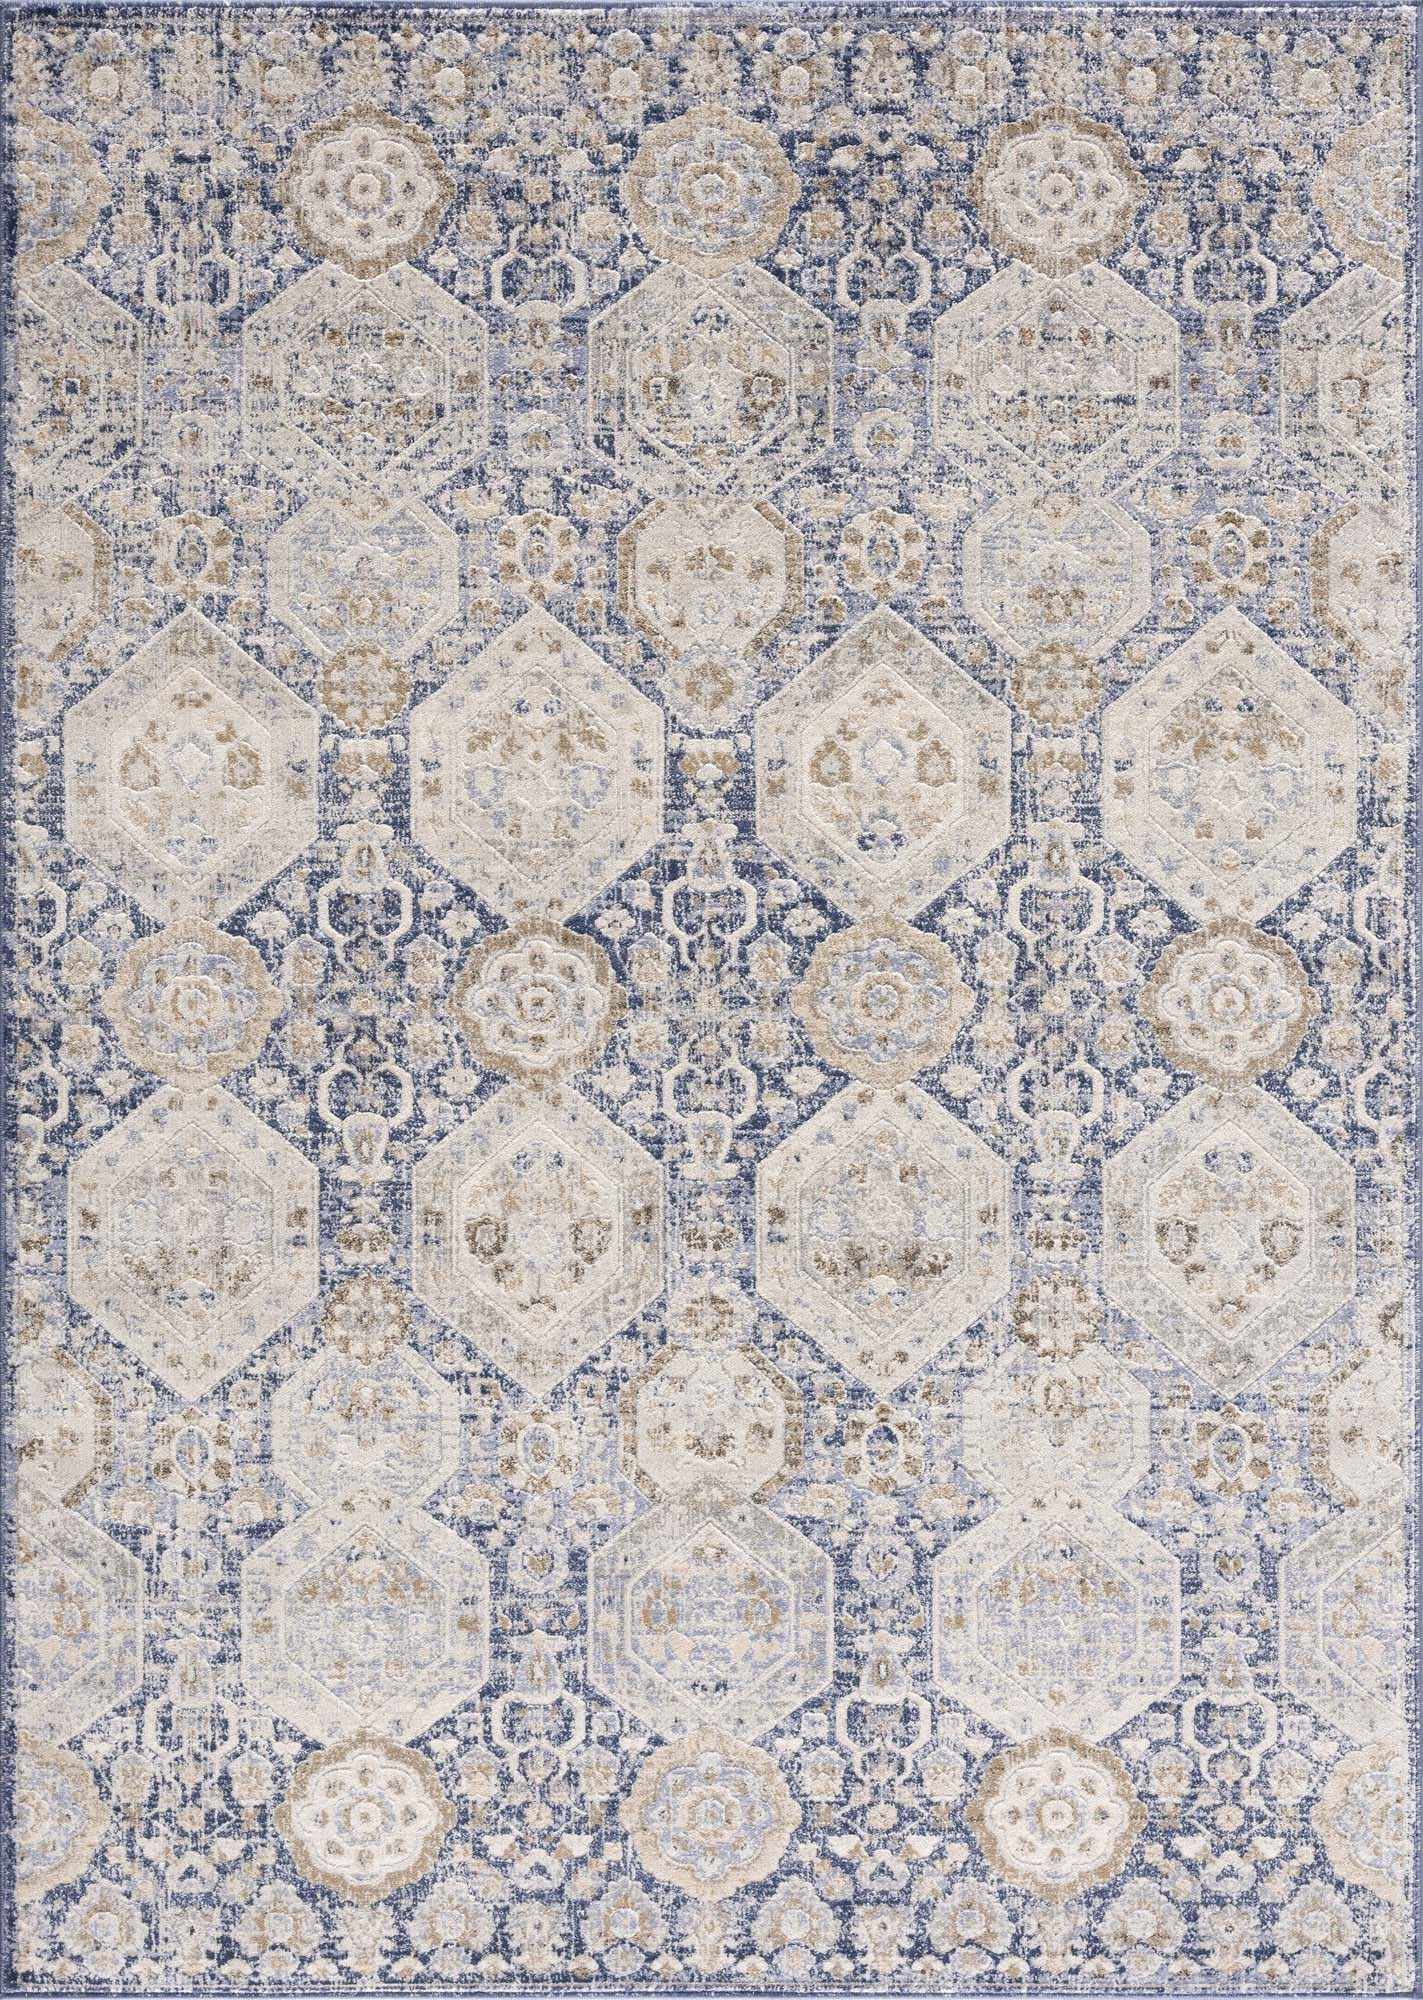 Boutique Rugs Rugs Parkerfield Blue Area Rug